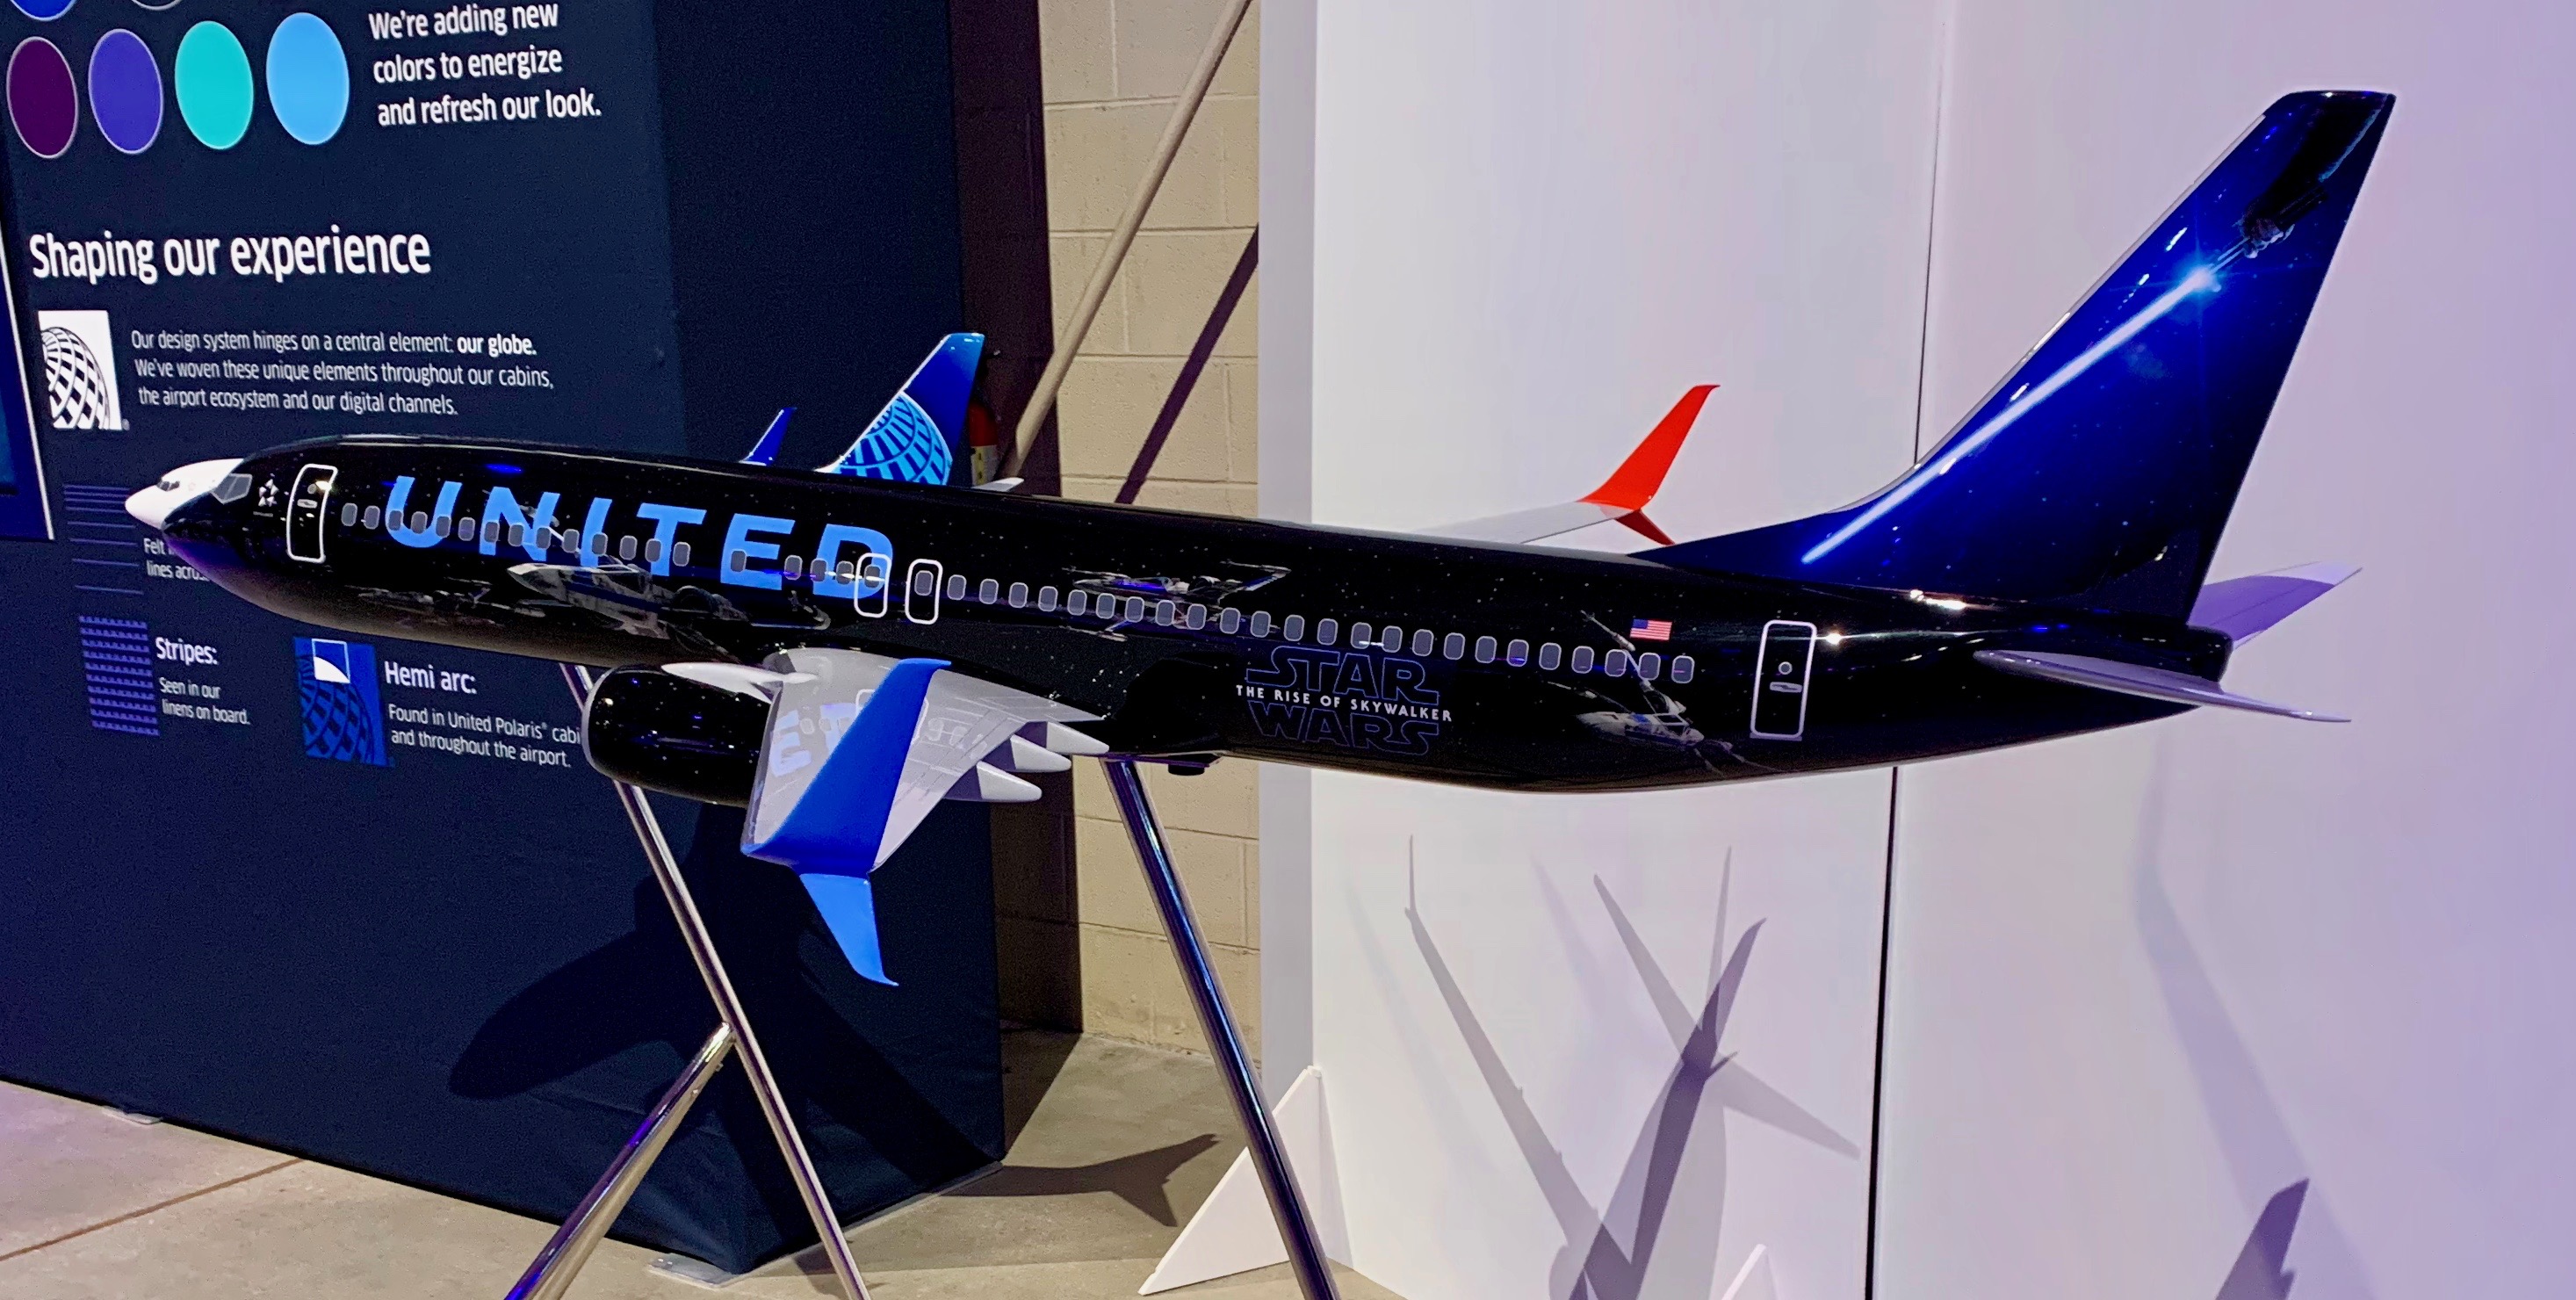 a model airplane on display